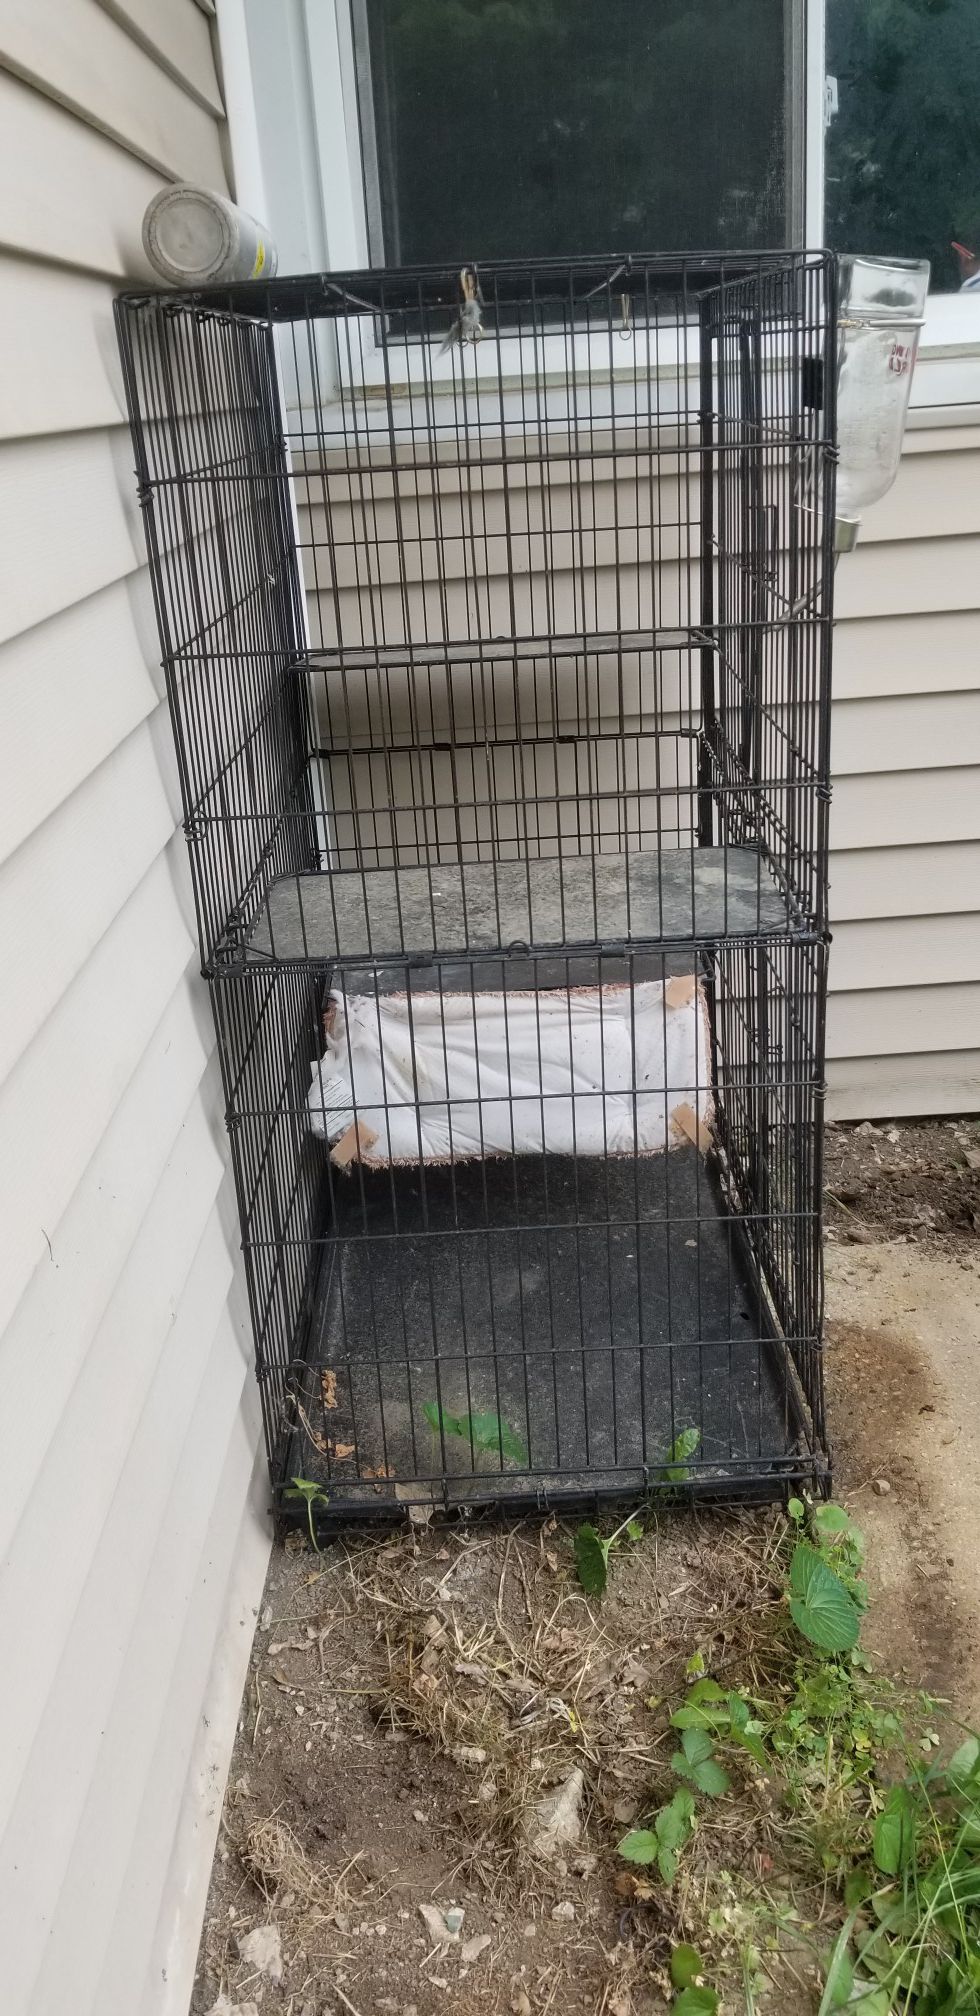 cage for parrots, birds or bunnies